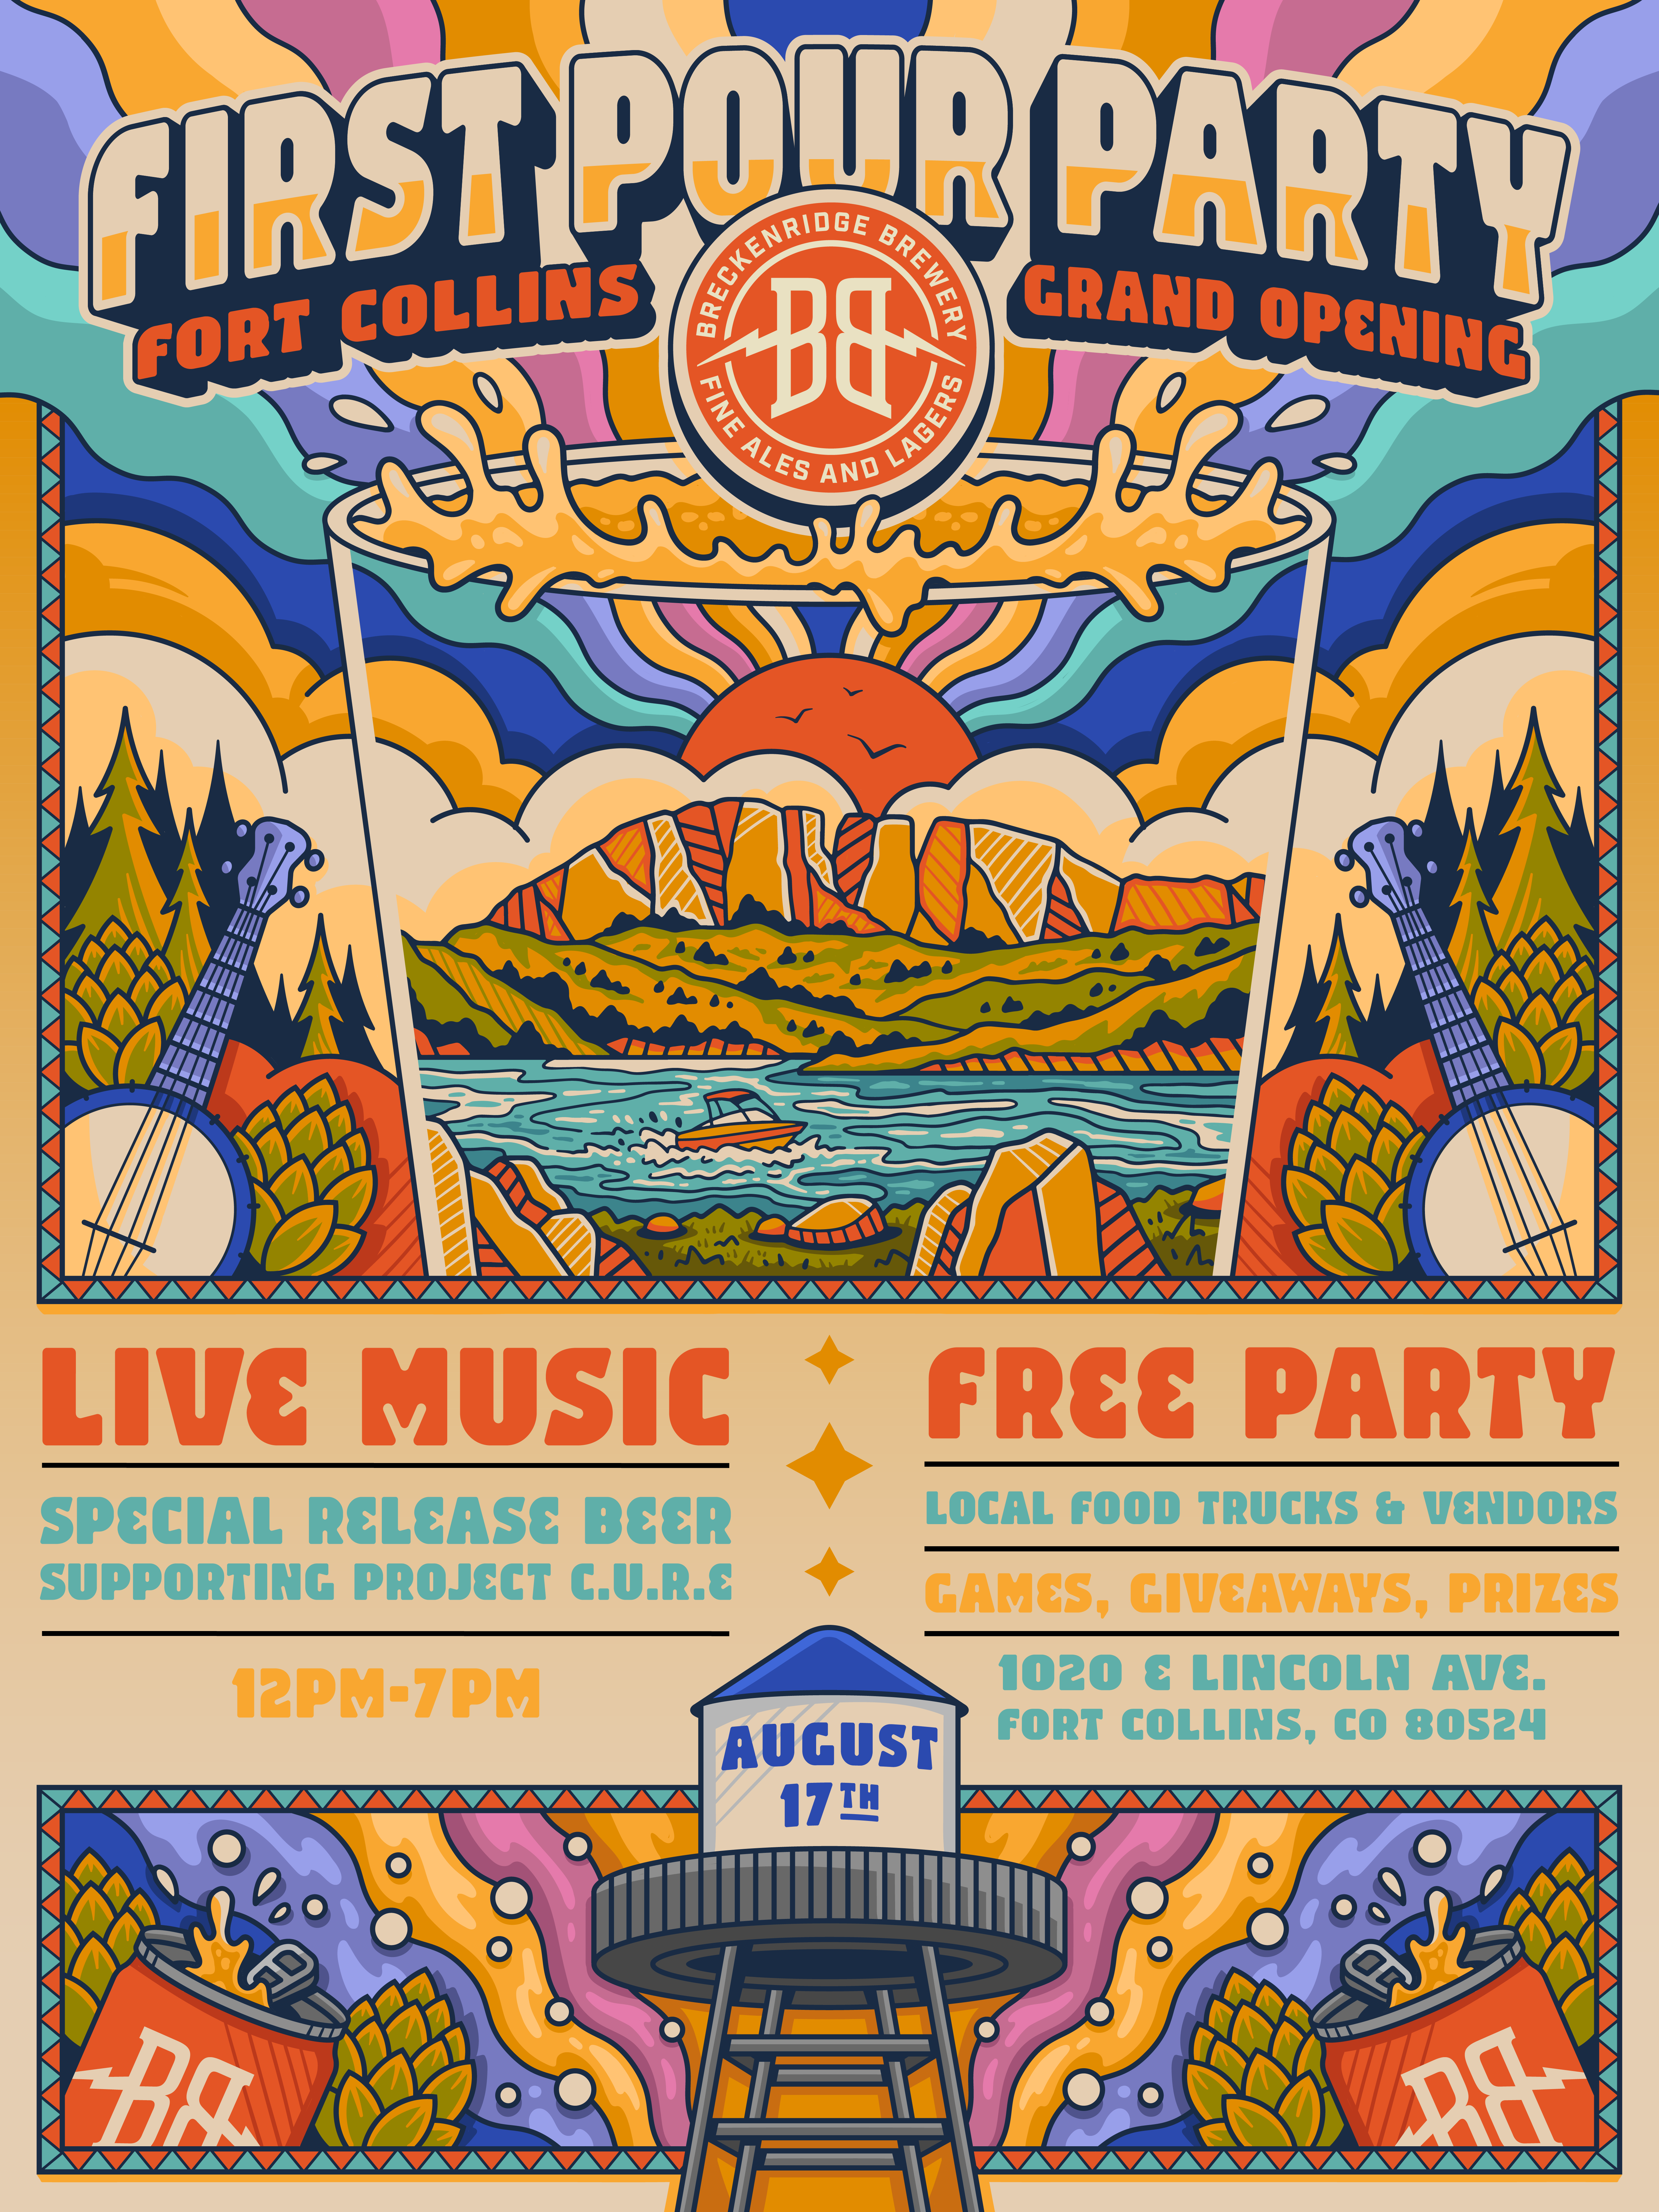 Official Poster for the 'First Pour Party' Hosted by Breckenridge Brewery